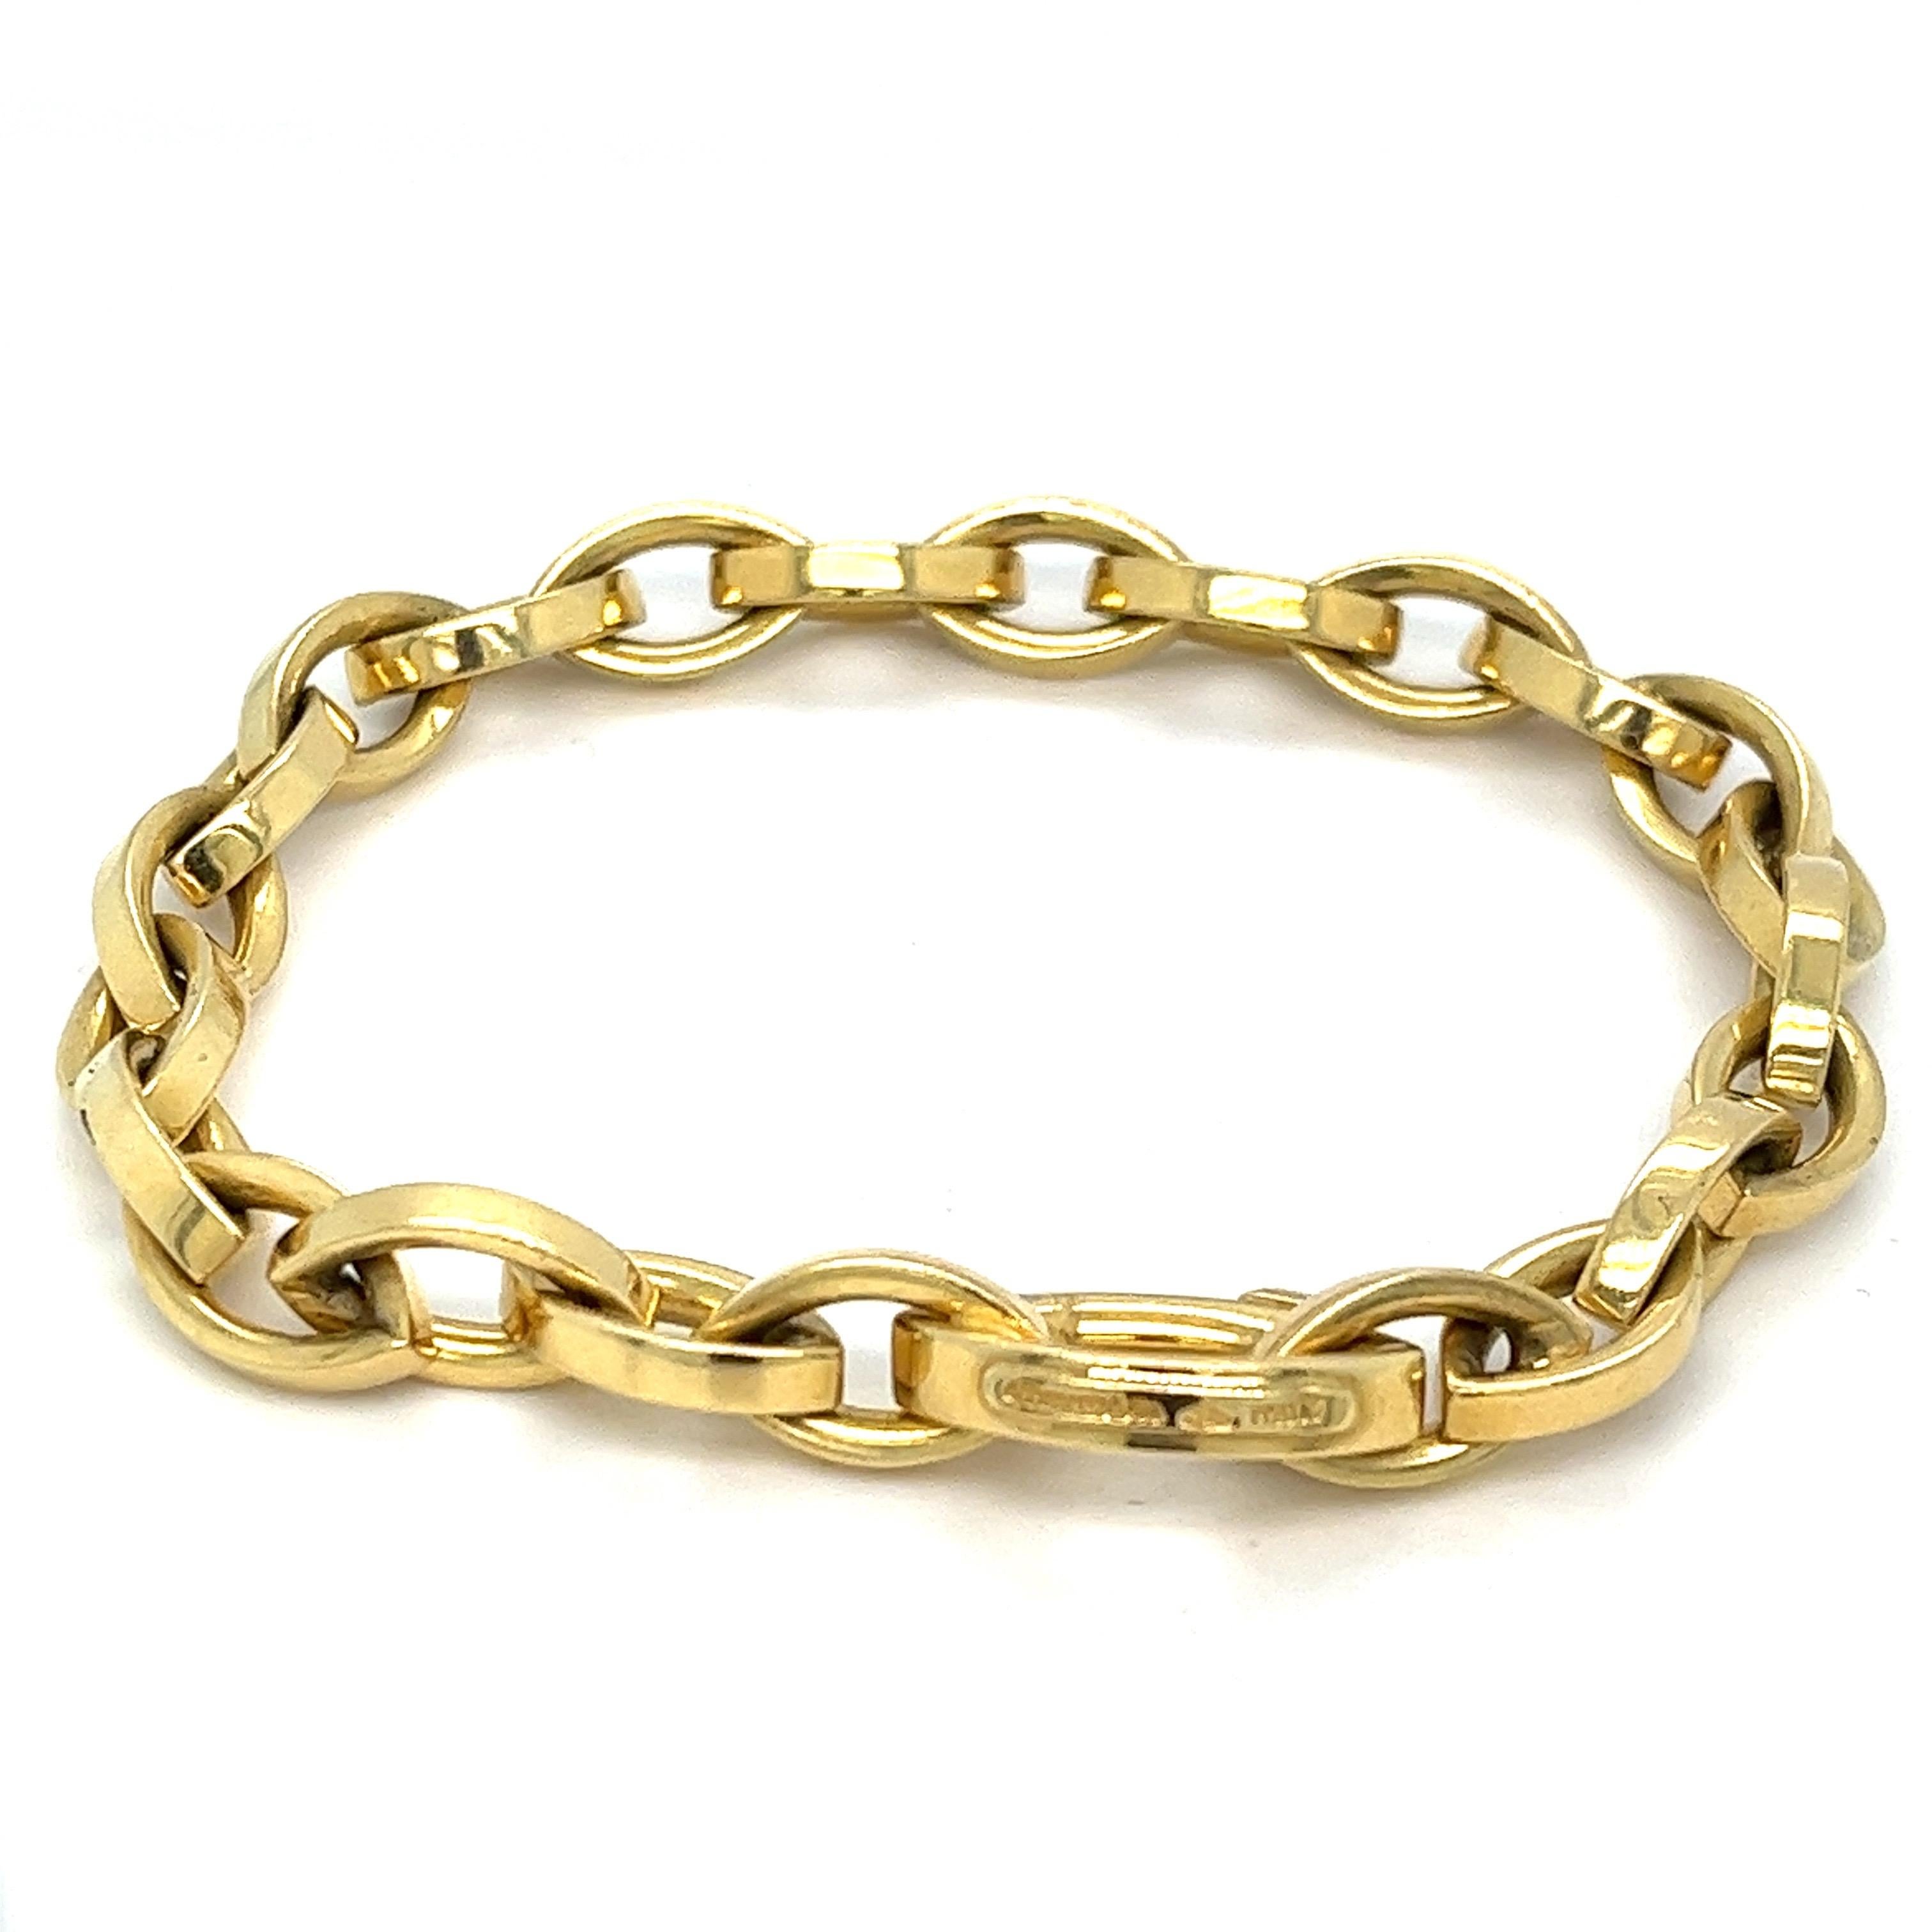 Offered here is a Tiffany & Co. 18kt Gold Marquise Bracelet - 1990, Italy - 7.50